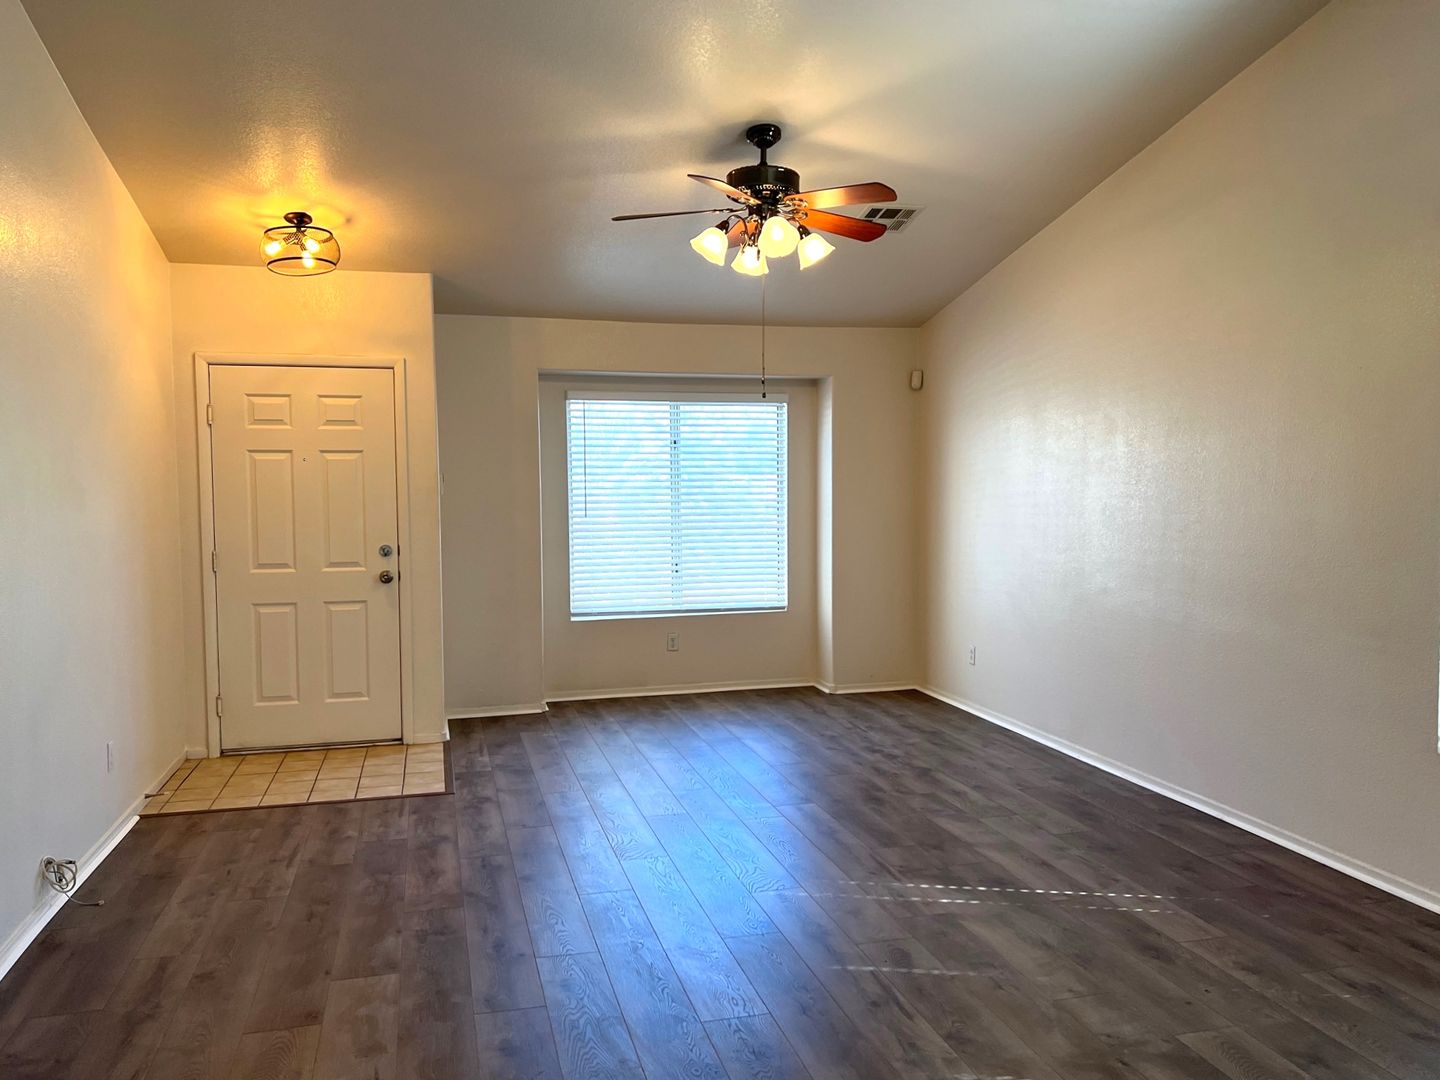 SINGLE STORY 2 BEDROOM GATED COMMUNITY NEAR NELLIS AIR FORCE BASE